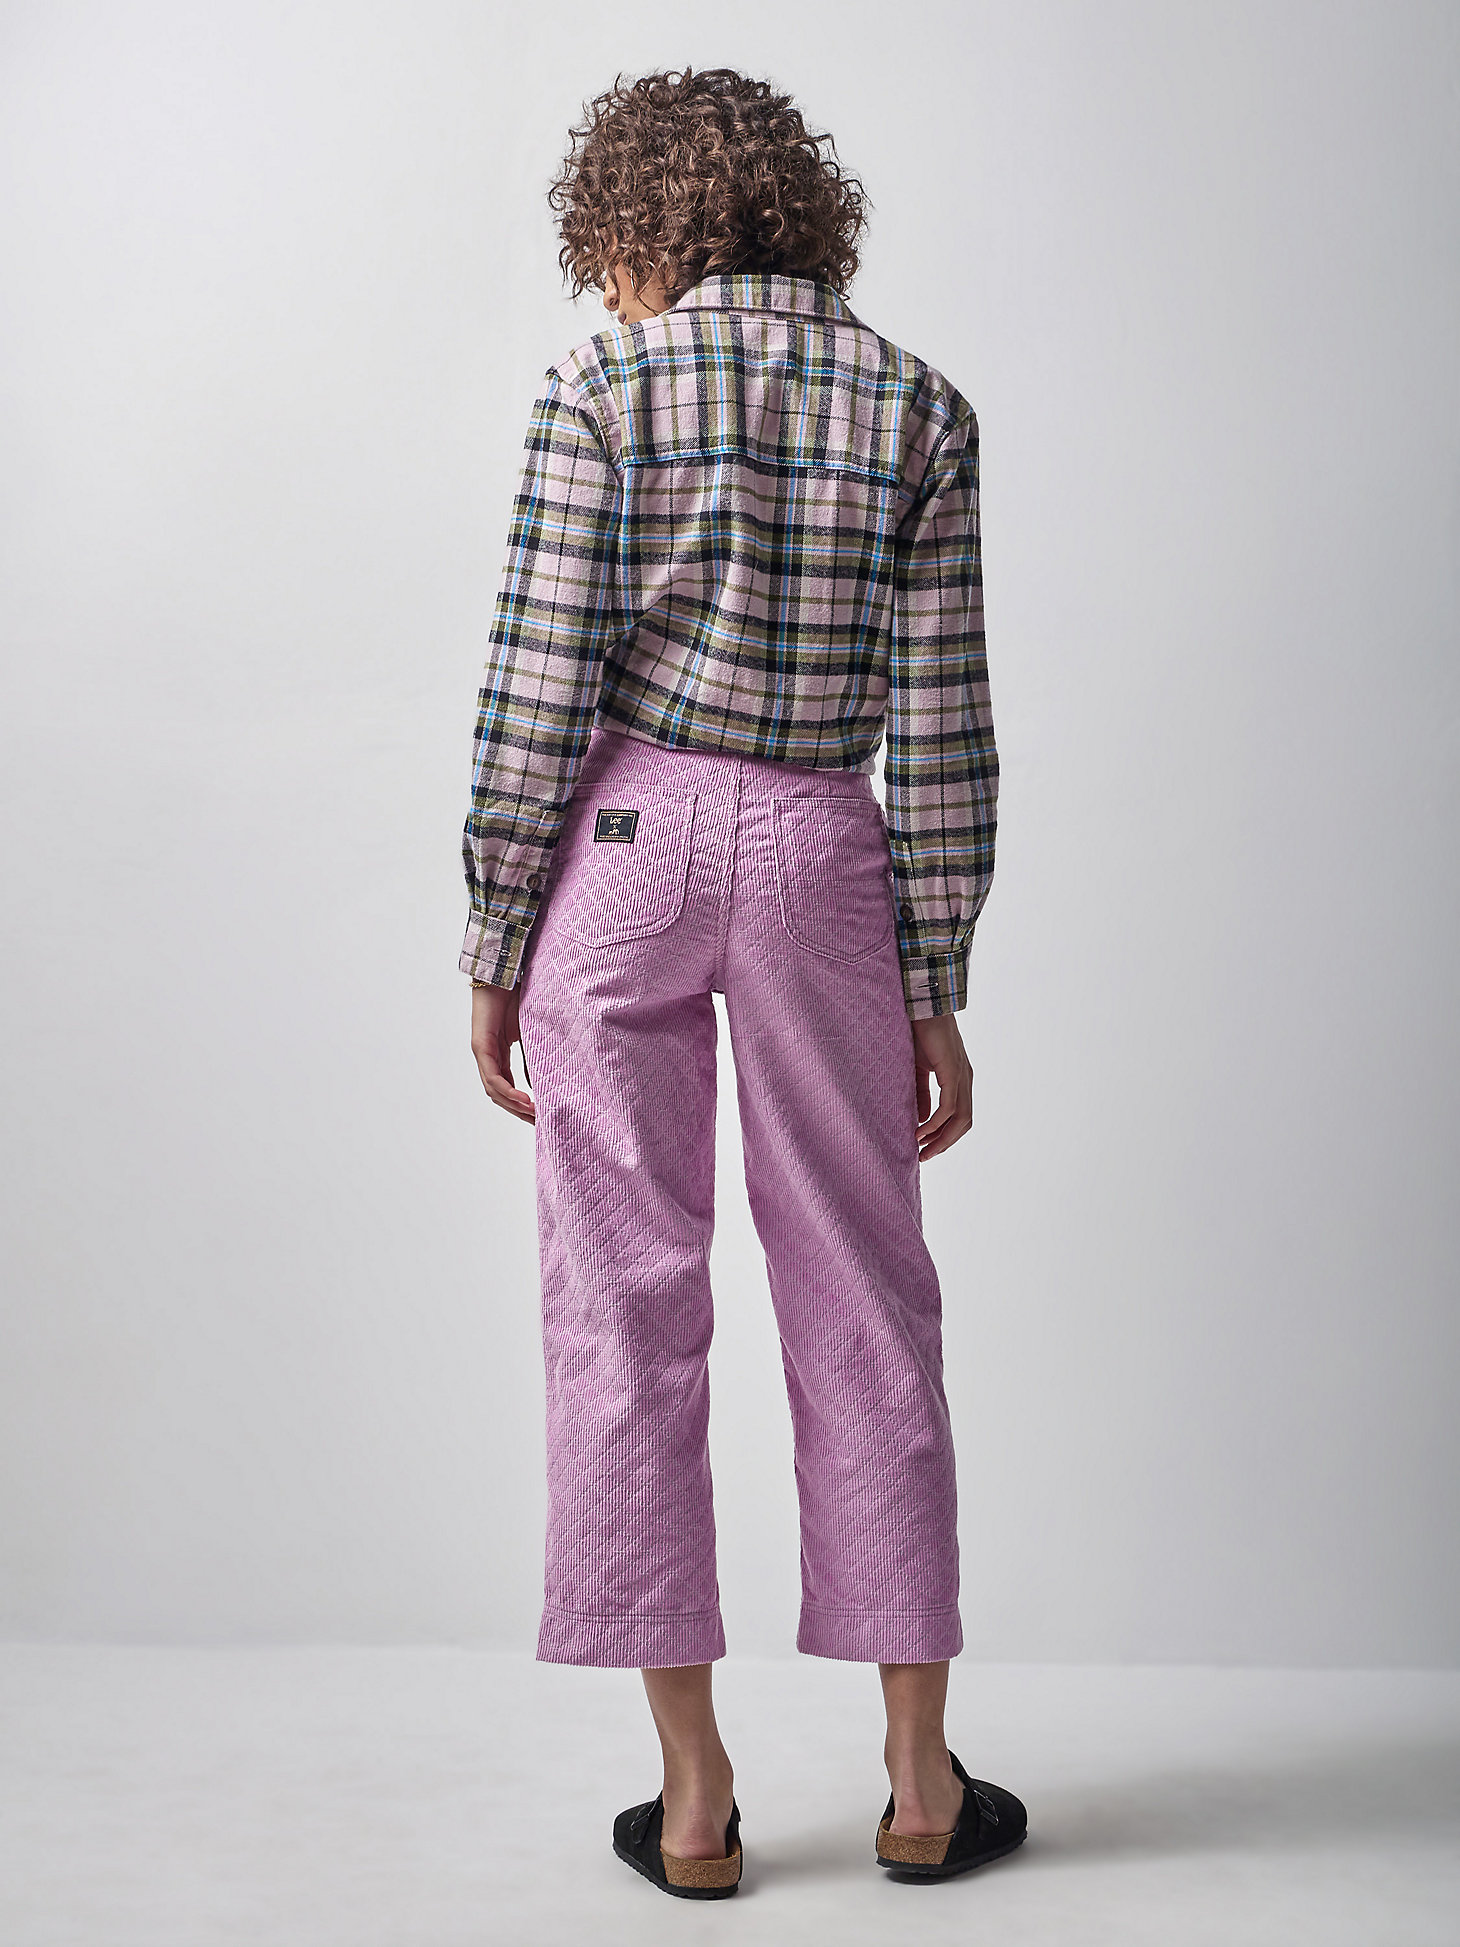 Women's Lee® x The Brooklyn Circus® Whizit Zip Corduroy Pant in Sugar Lilac alternative view 2